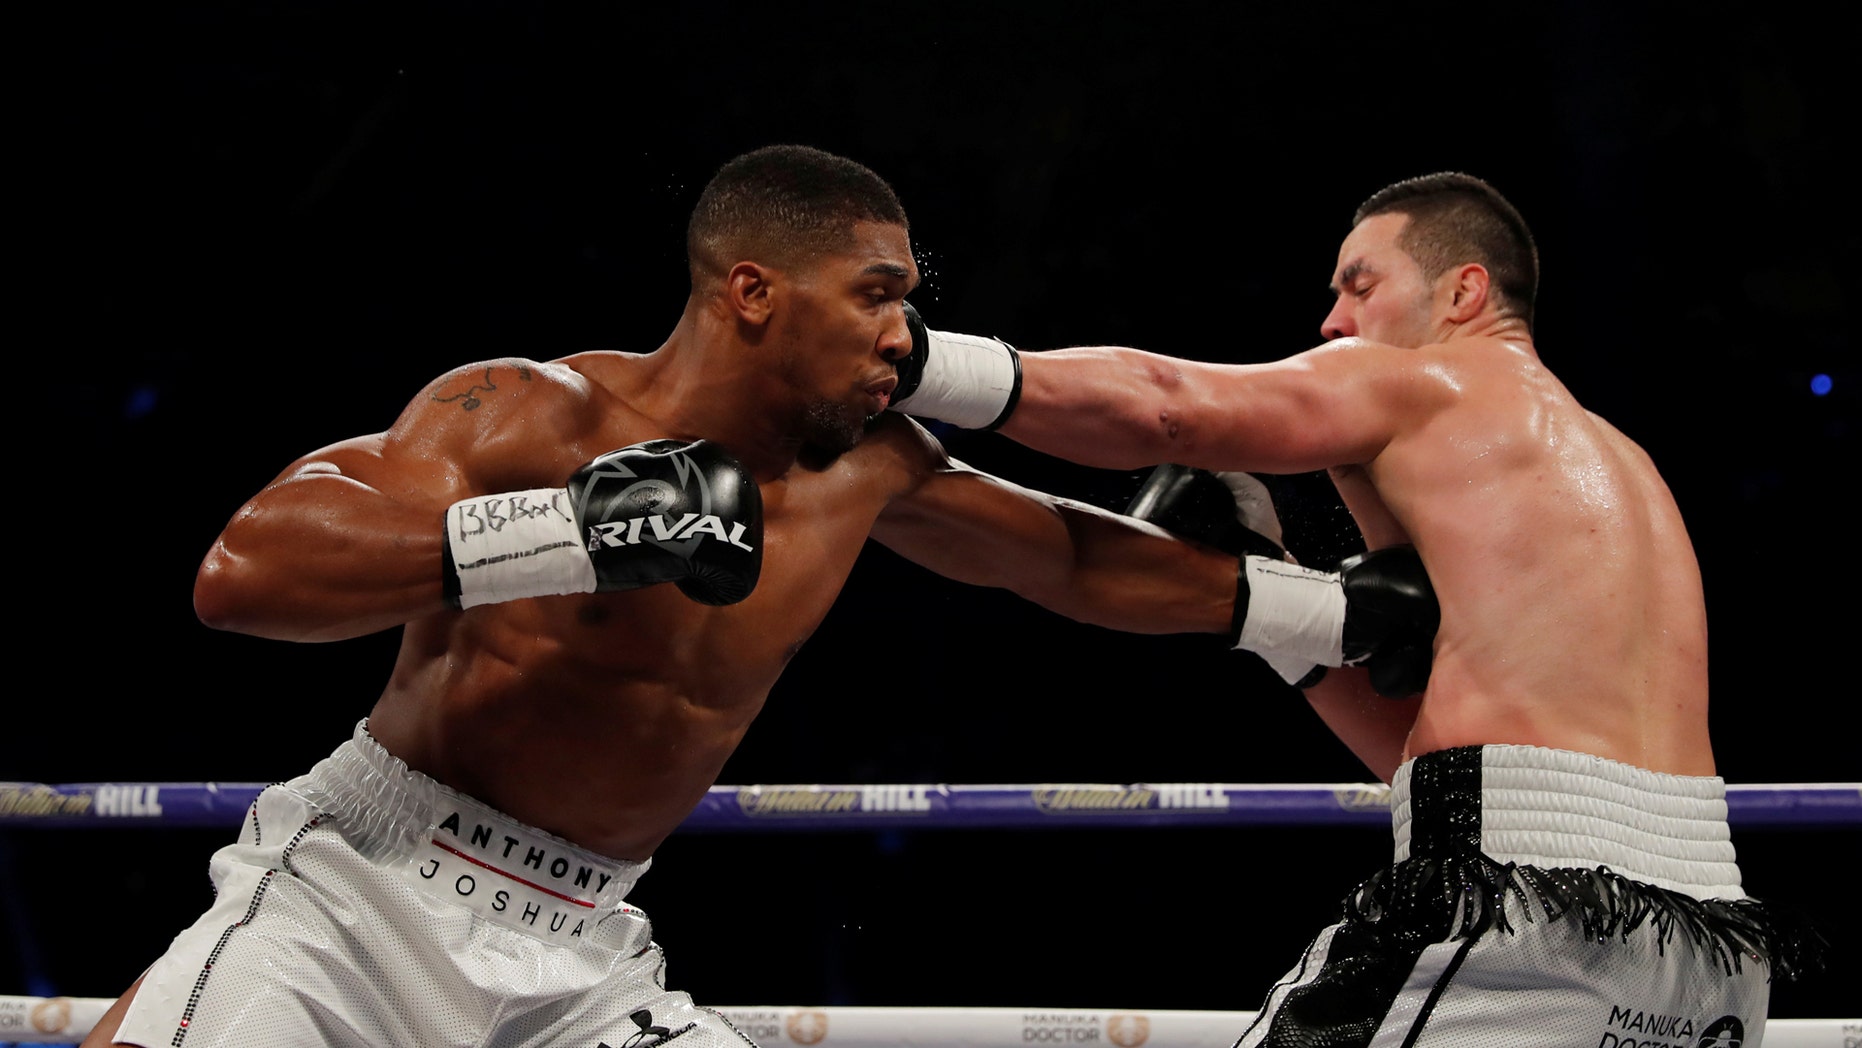 Joshua vs Parker 225,000 viewers watched fight on pirated streams